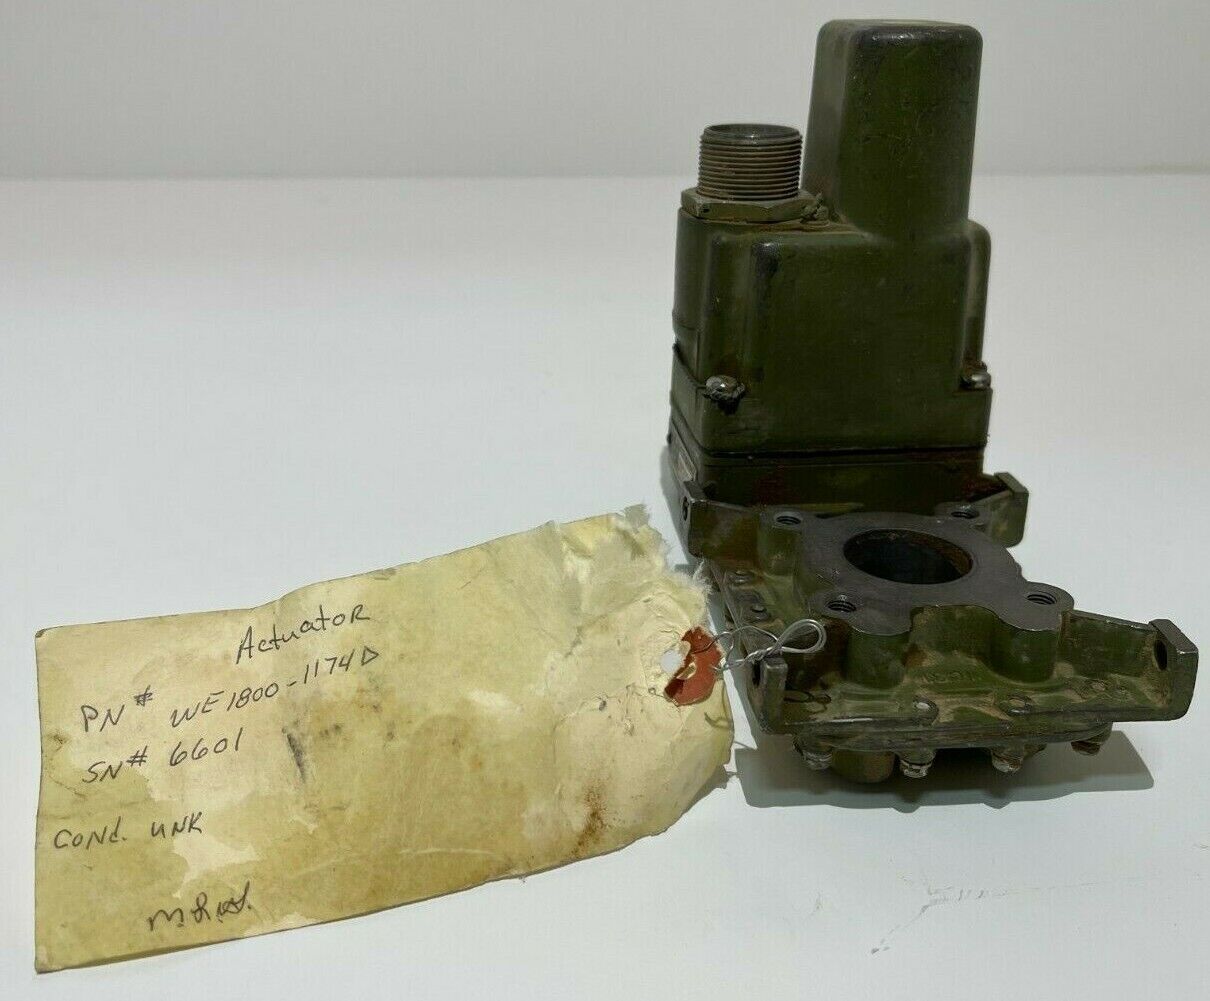 Whittaker Fuel Valve Motor Actuated WE1800-1174D SN6601 BAC10-807